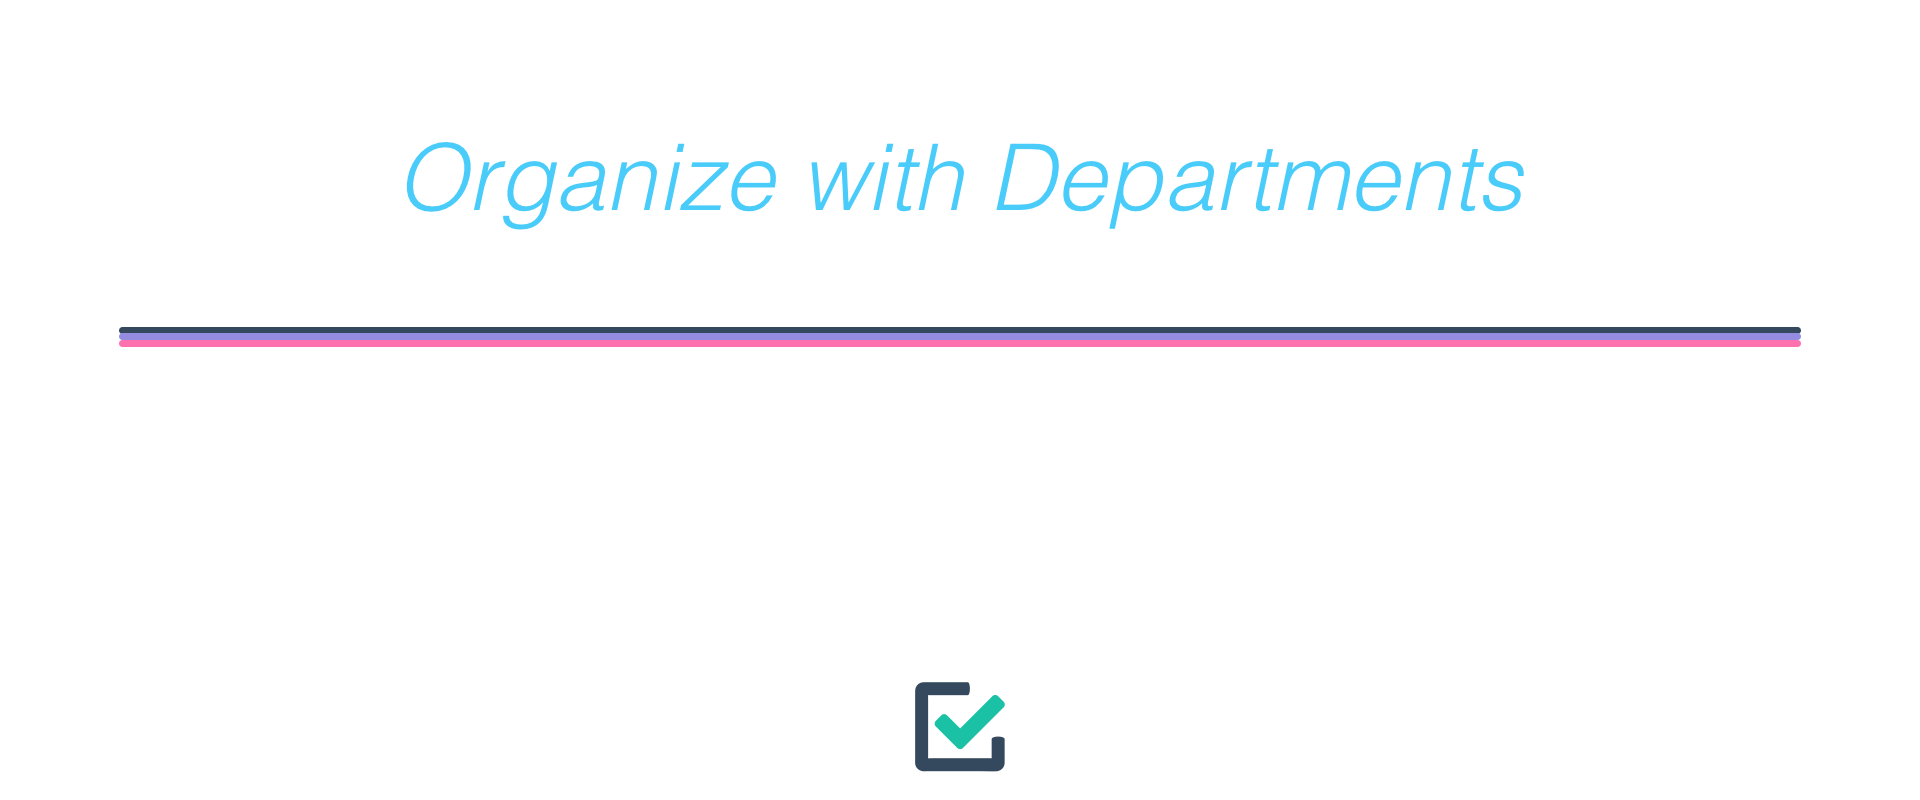 Organize with departments